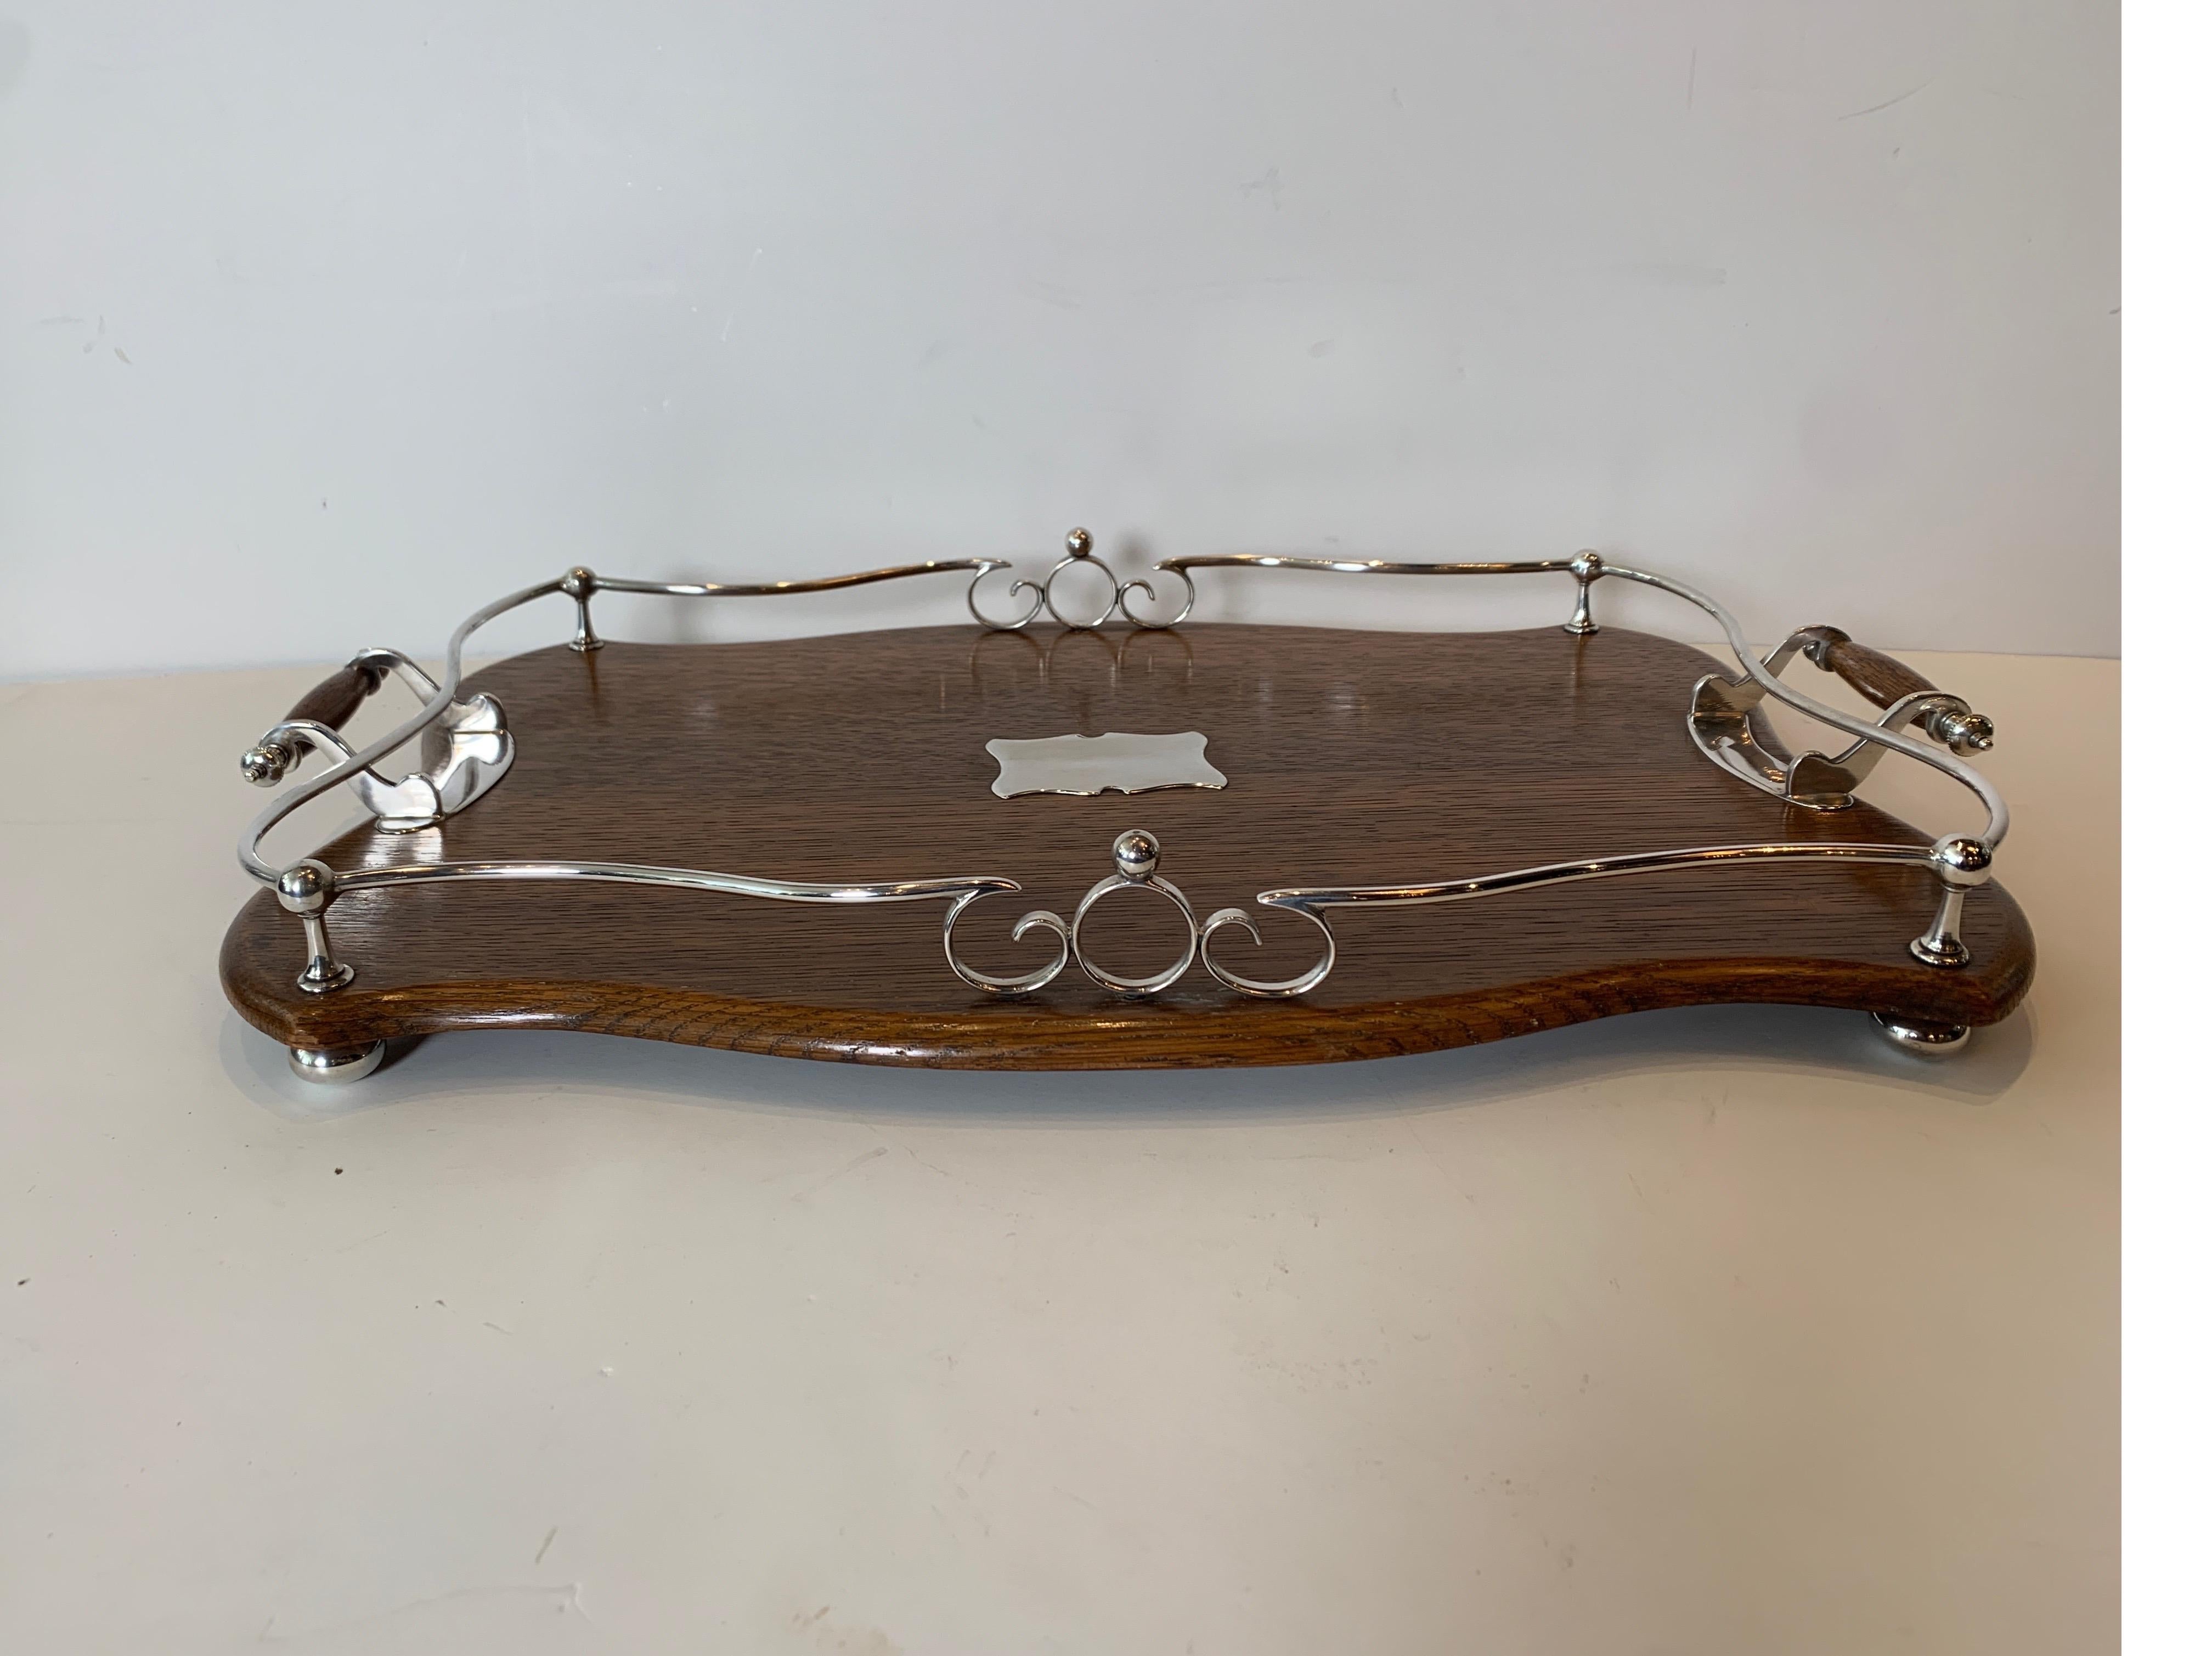 Early 20th century English silver-plate and solid oak gallery handled serving tray
Very nice design and in original condition.
Dimensions: 22